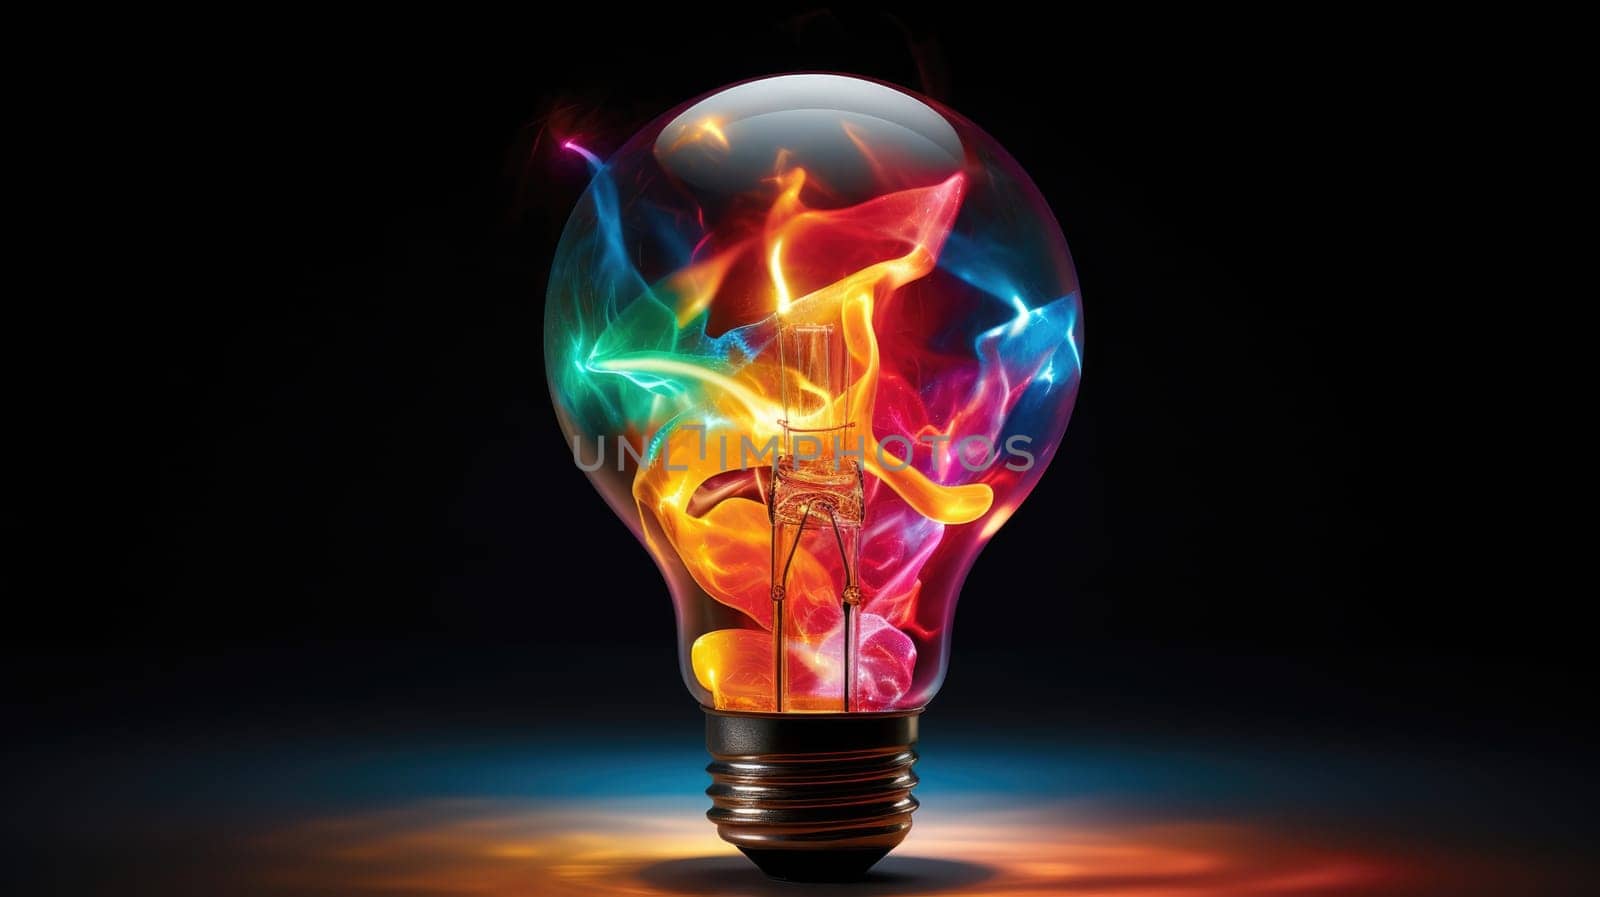 Bulb-shaped lamp bursts into life with a cascade of vivid colors ultra realistic illustration - Generative AI. by simakovavector